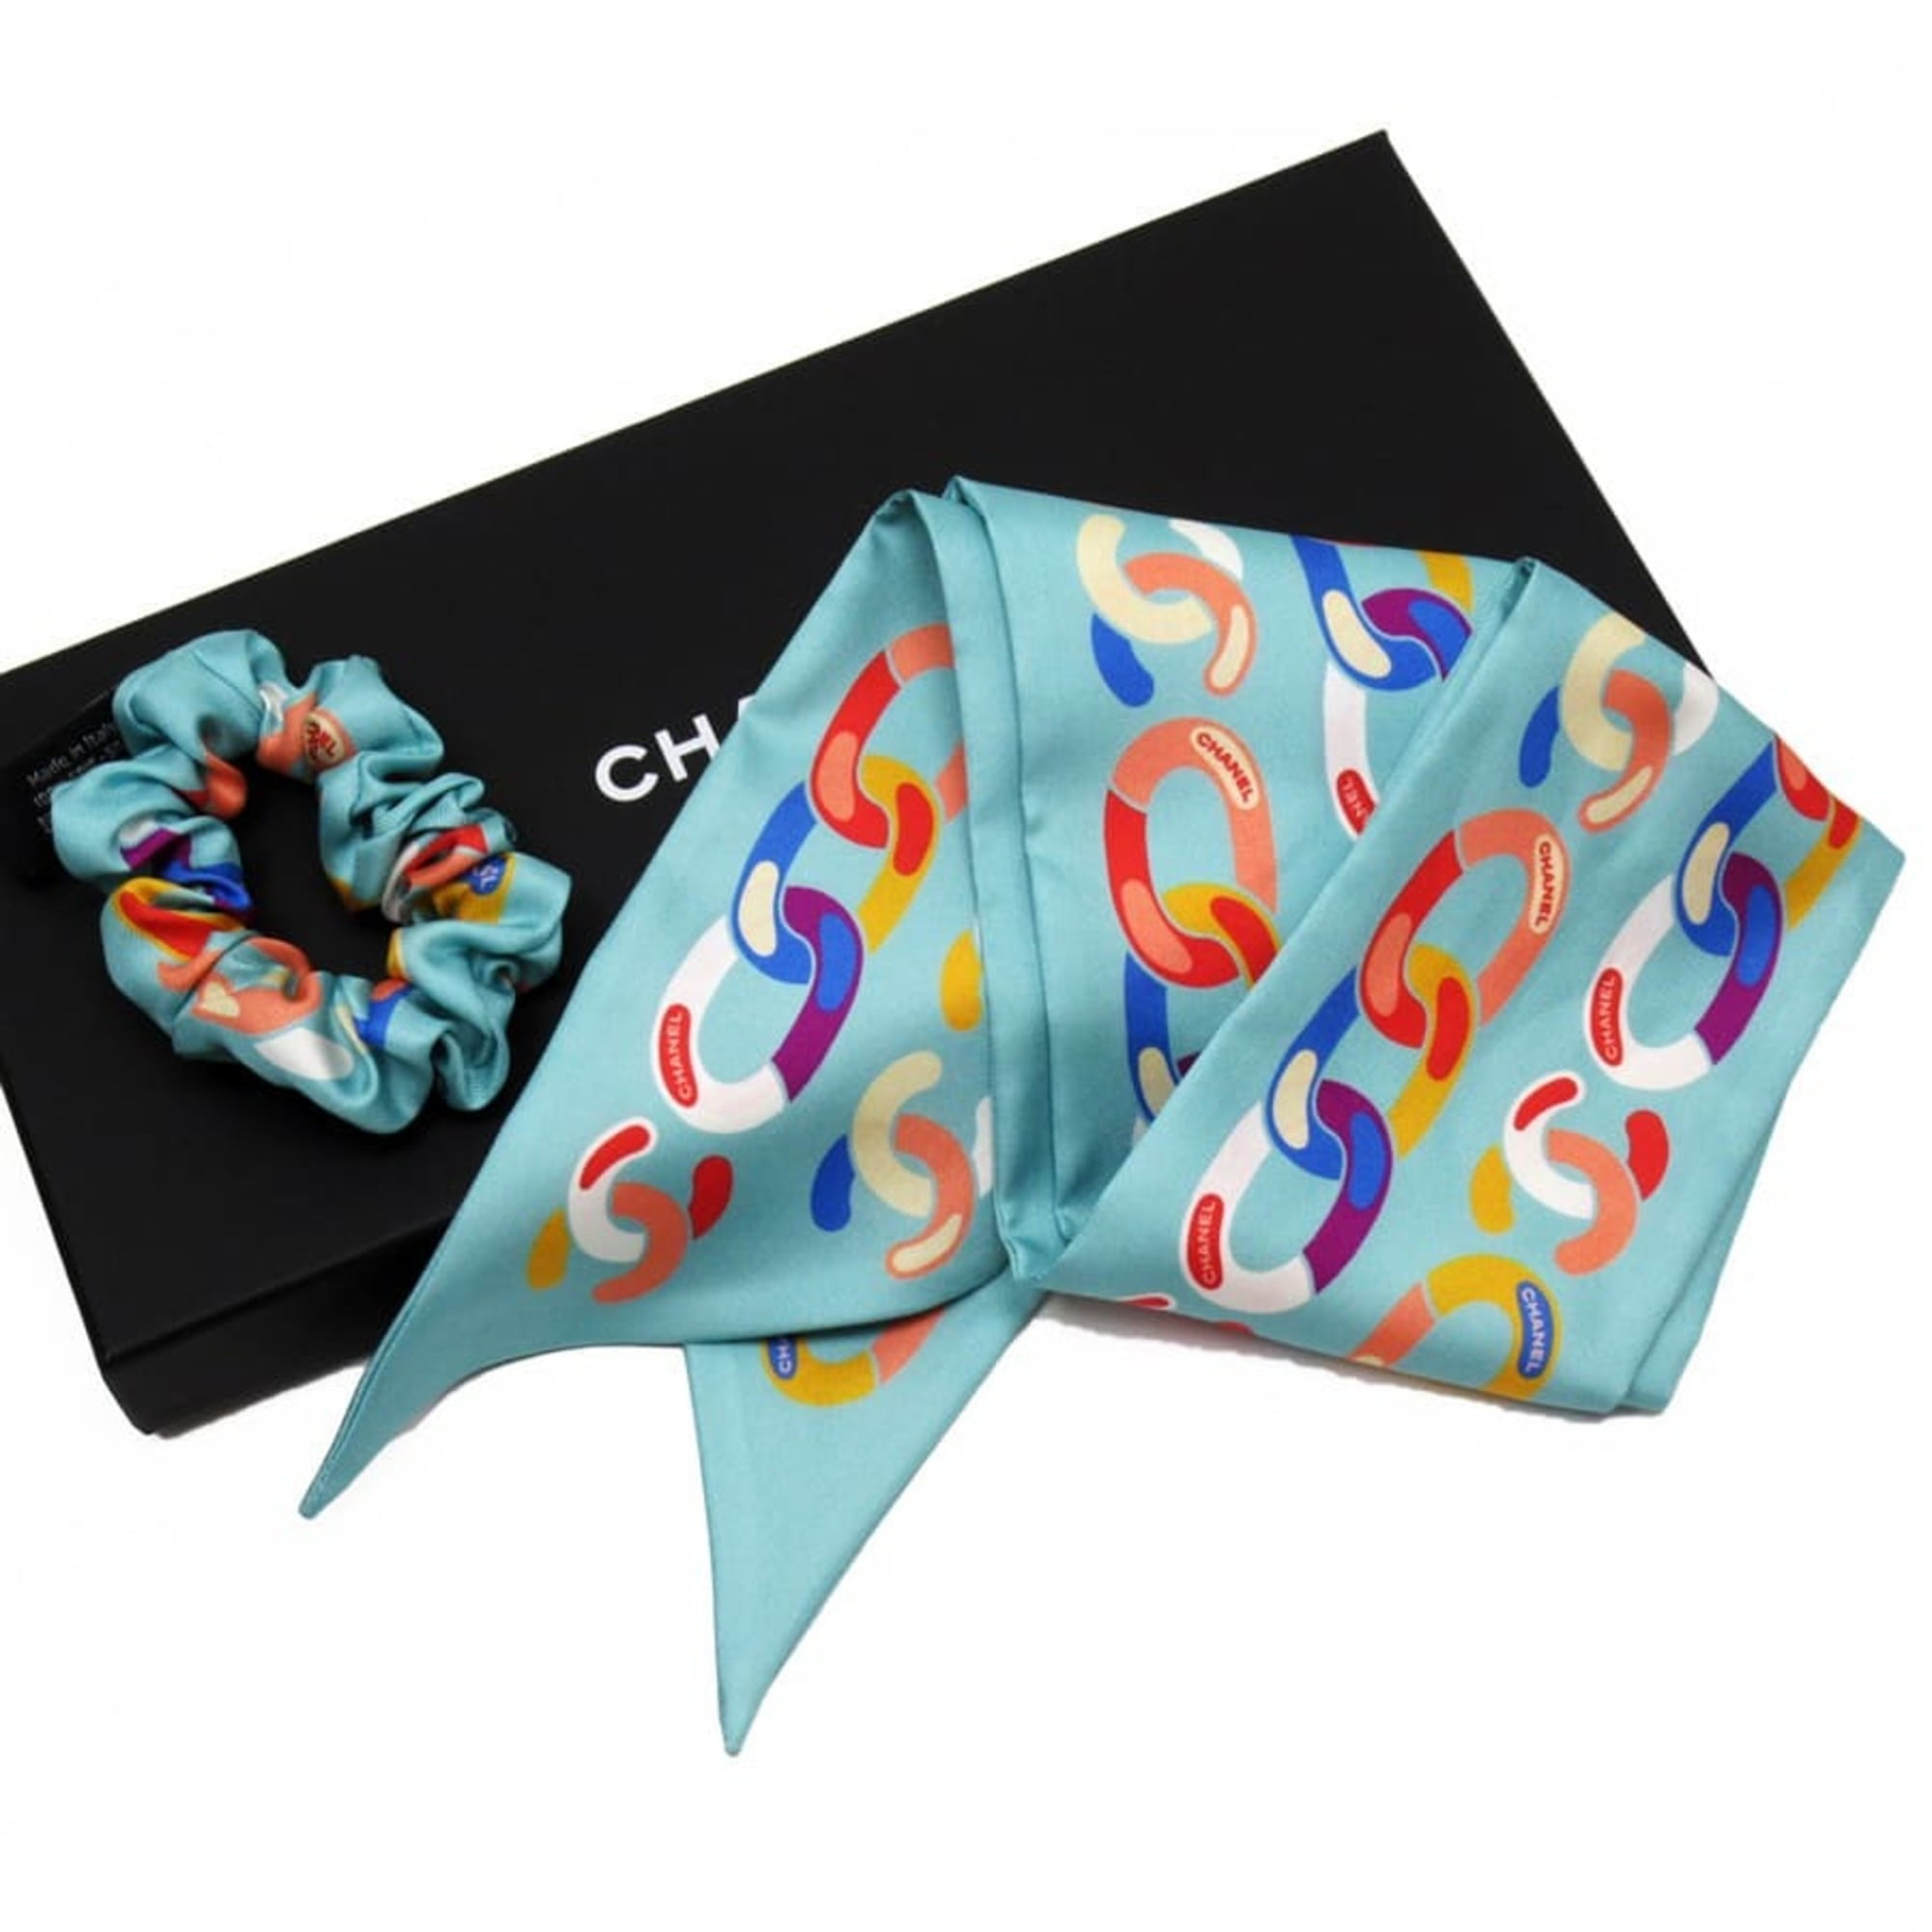 Authenticated Used Chanel CHANEL scrunchie hair accessory blue series 100%  silk